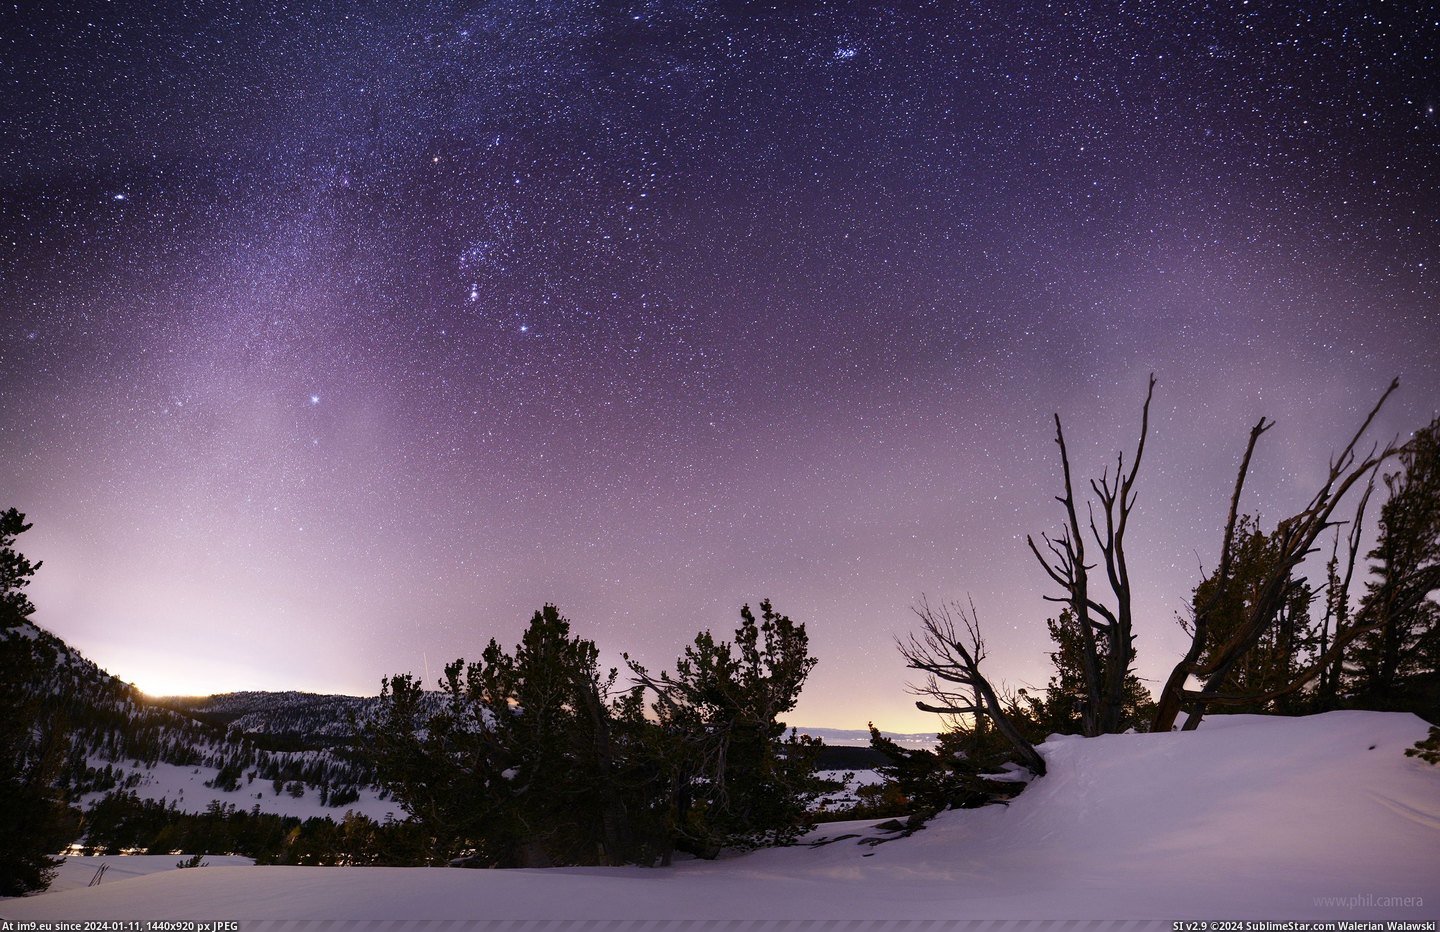 #Photo #Wallpaper #Night #Lake #Left #Winter #Rose #Sky #Nature #Stars [Earthporn] Winter Night Sky over The Mt Rose - Sheep Flat meadow last night, with Carson down to the left and Lake Tahoe peakin Pic. (Image of album My r/EARTHPORN favs))